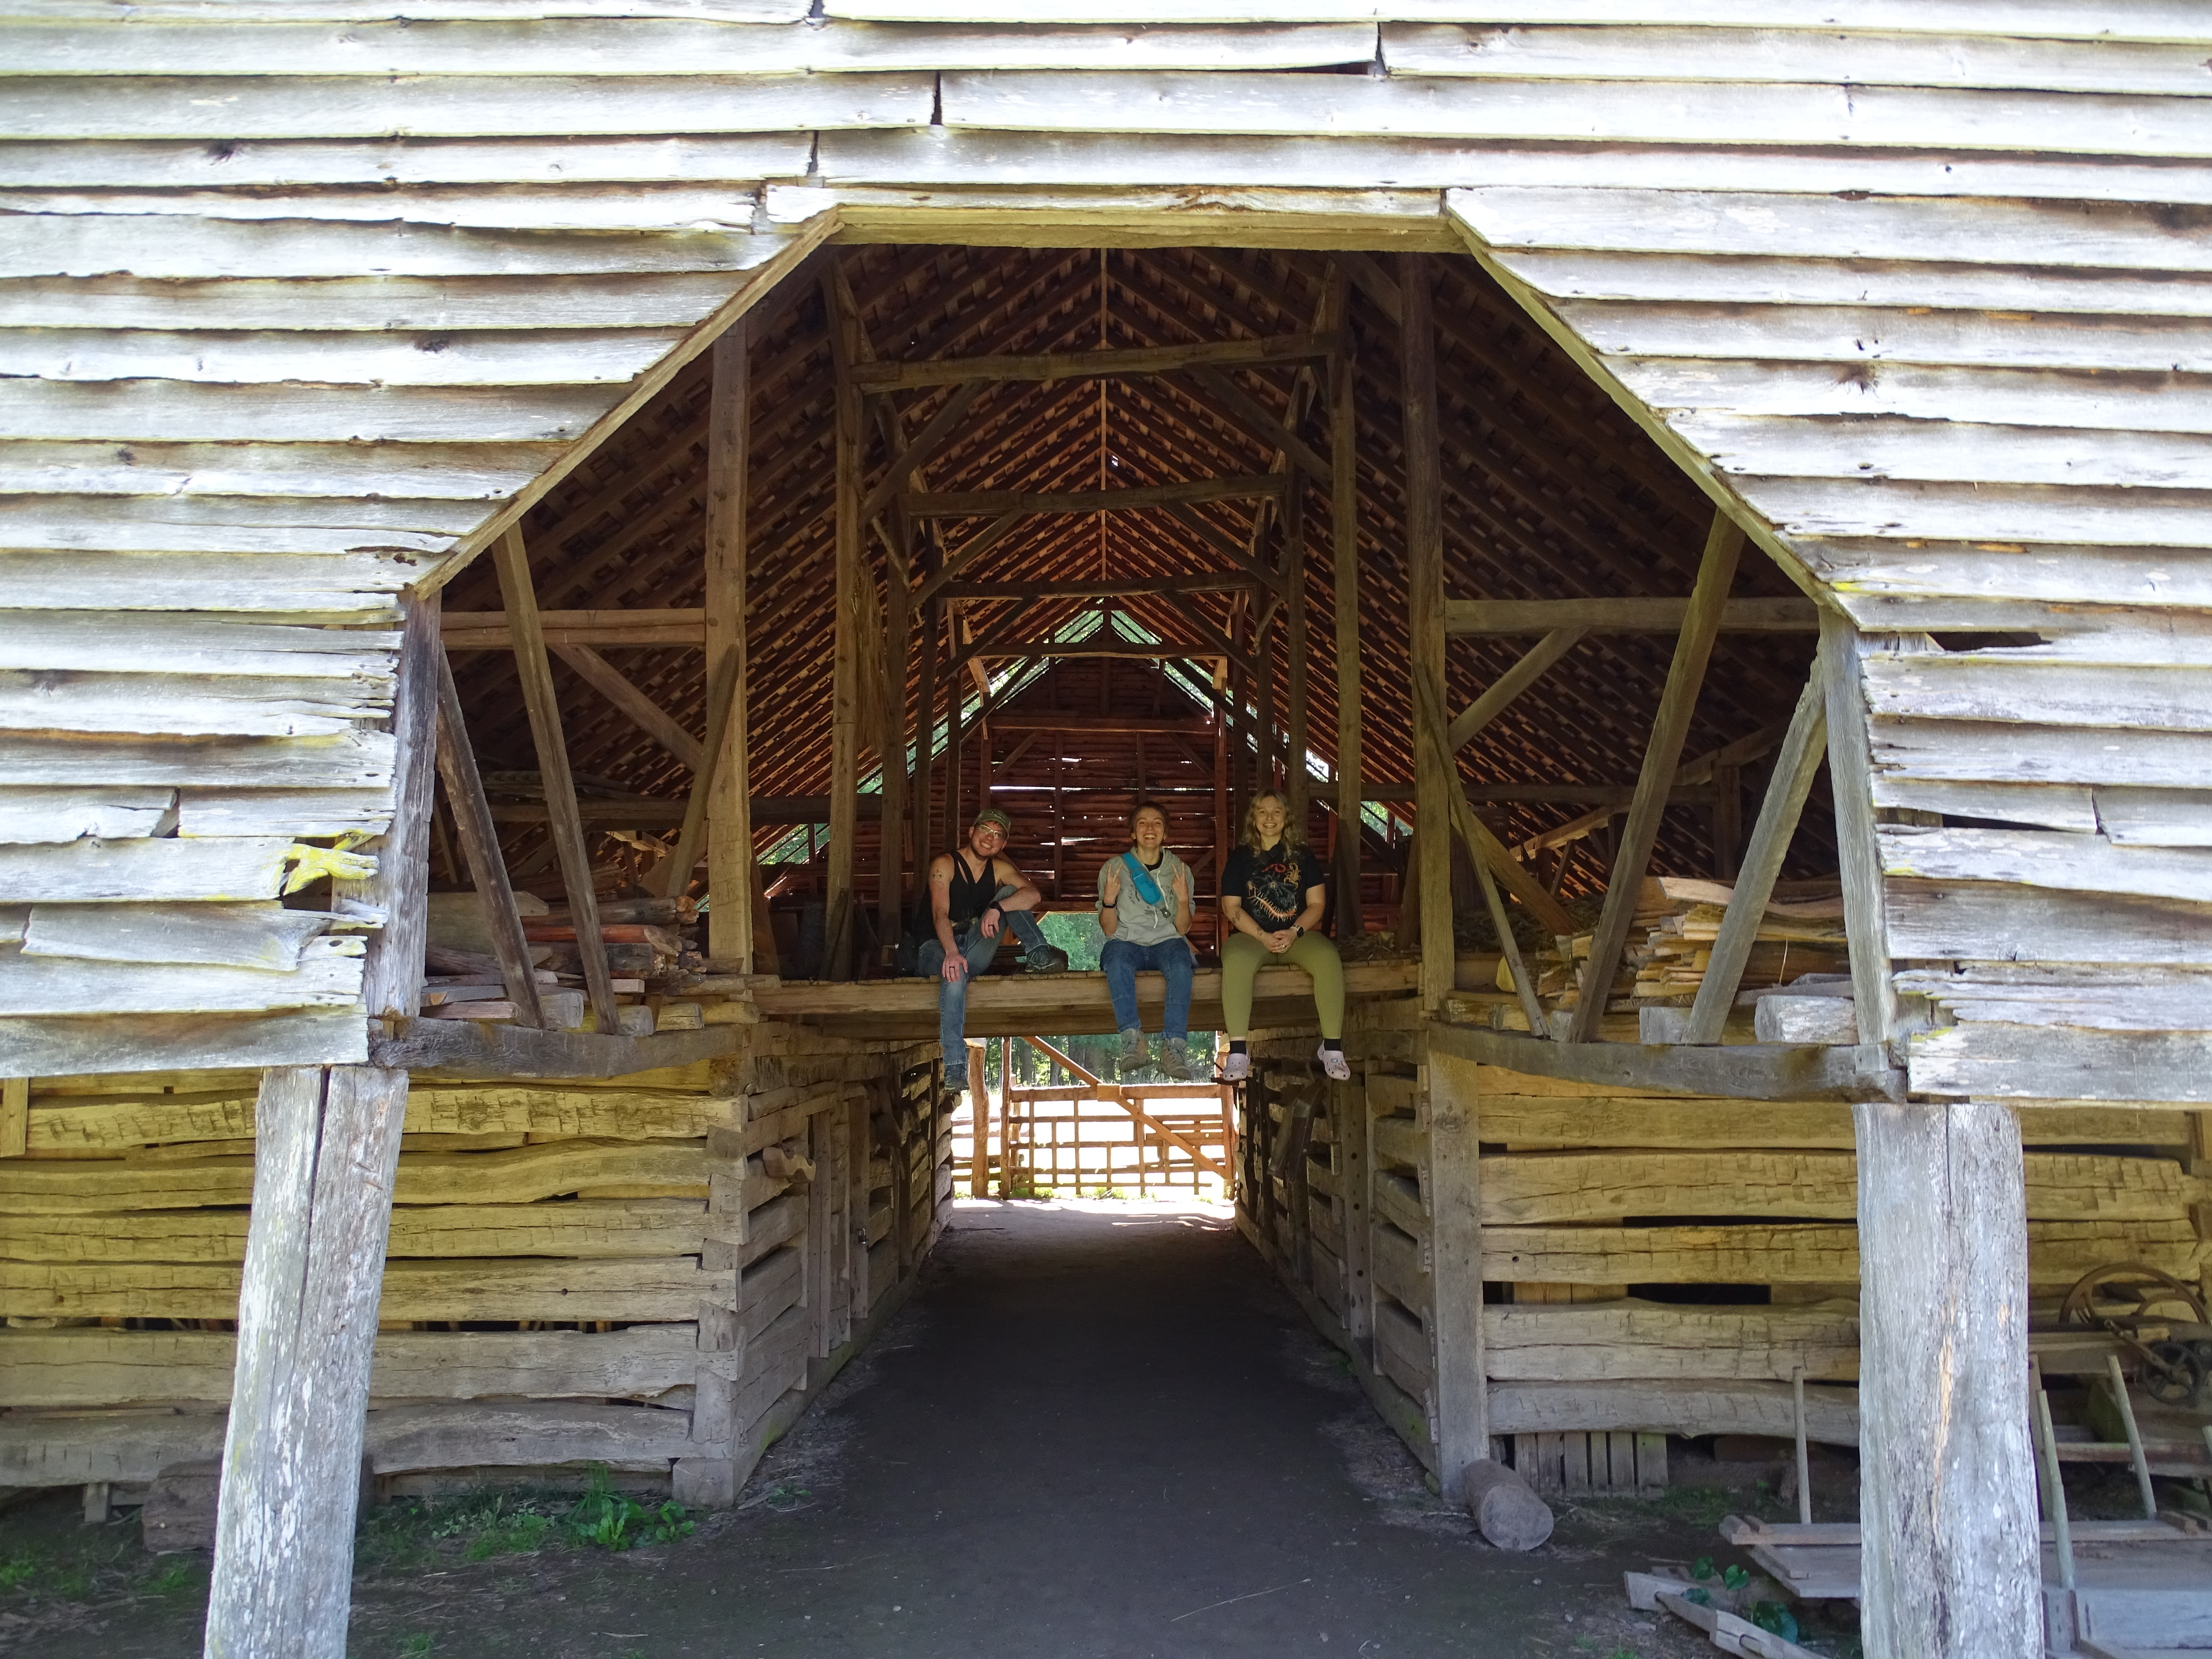 looking at a barn with a hay loft. All three people from the previous photograph are sitting in the hay loft and smiling at the camera.